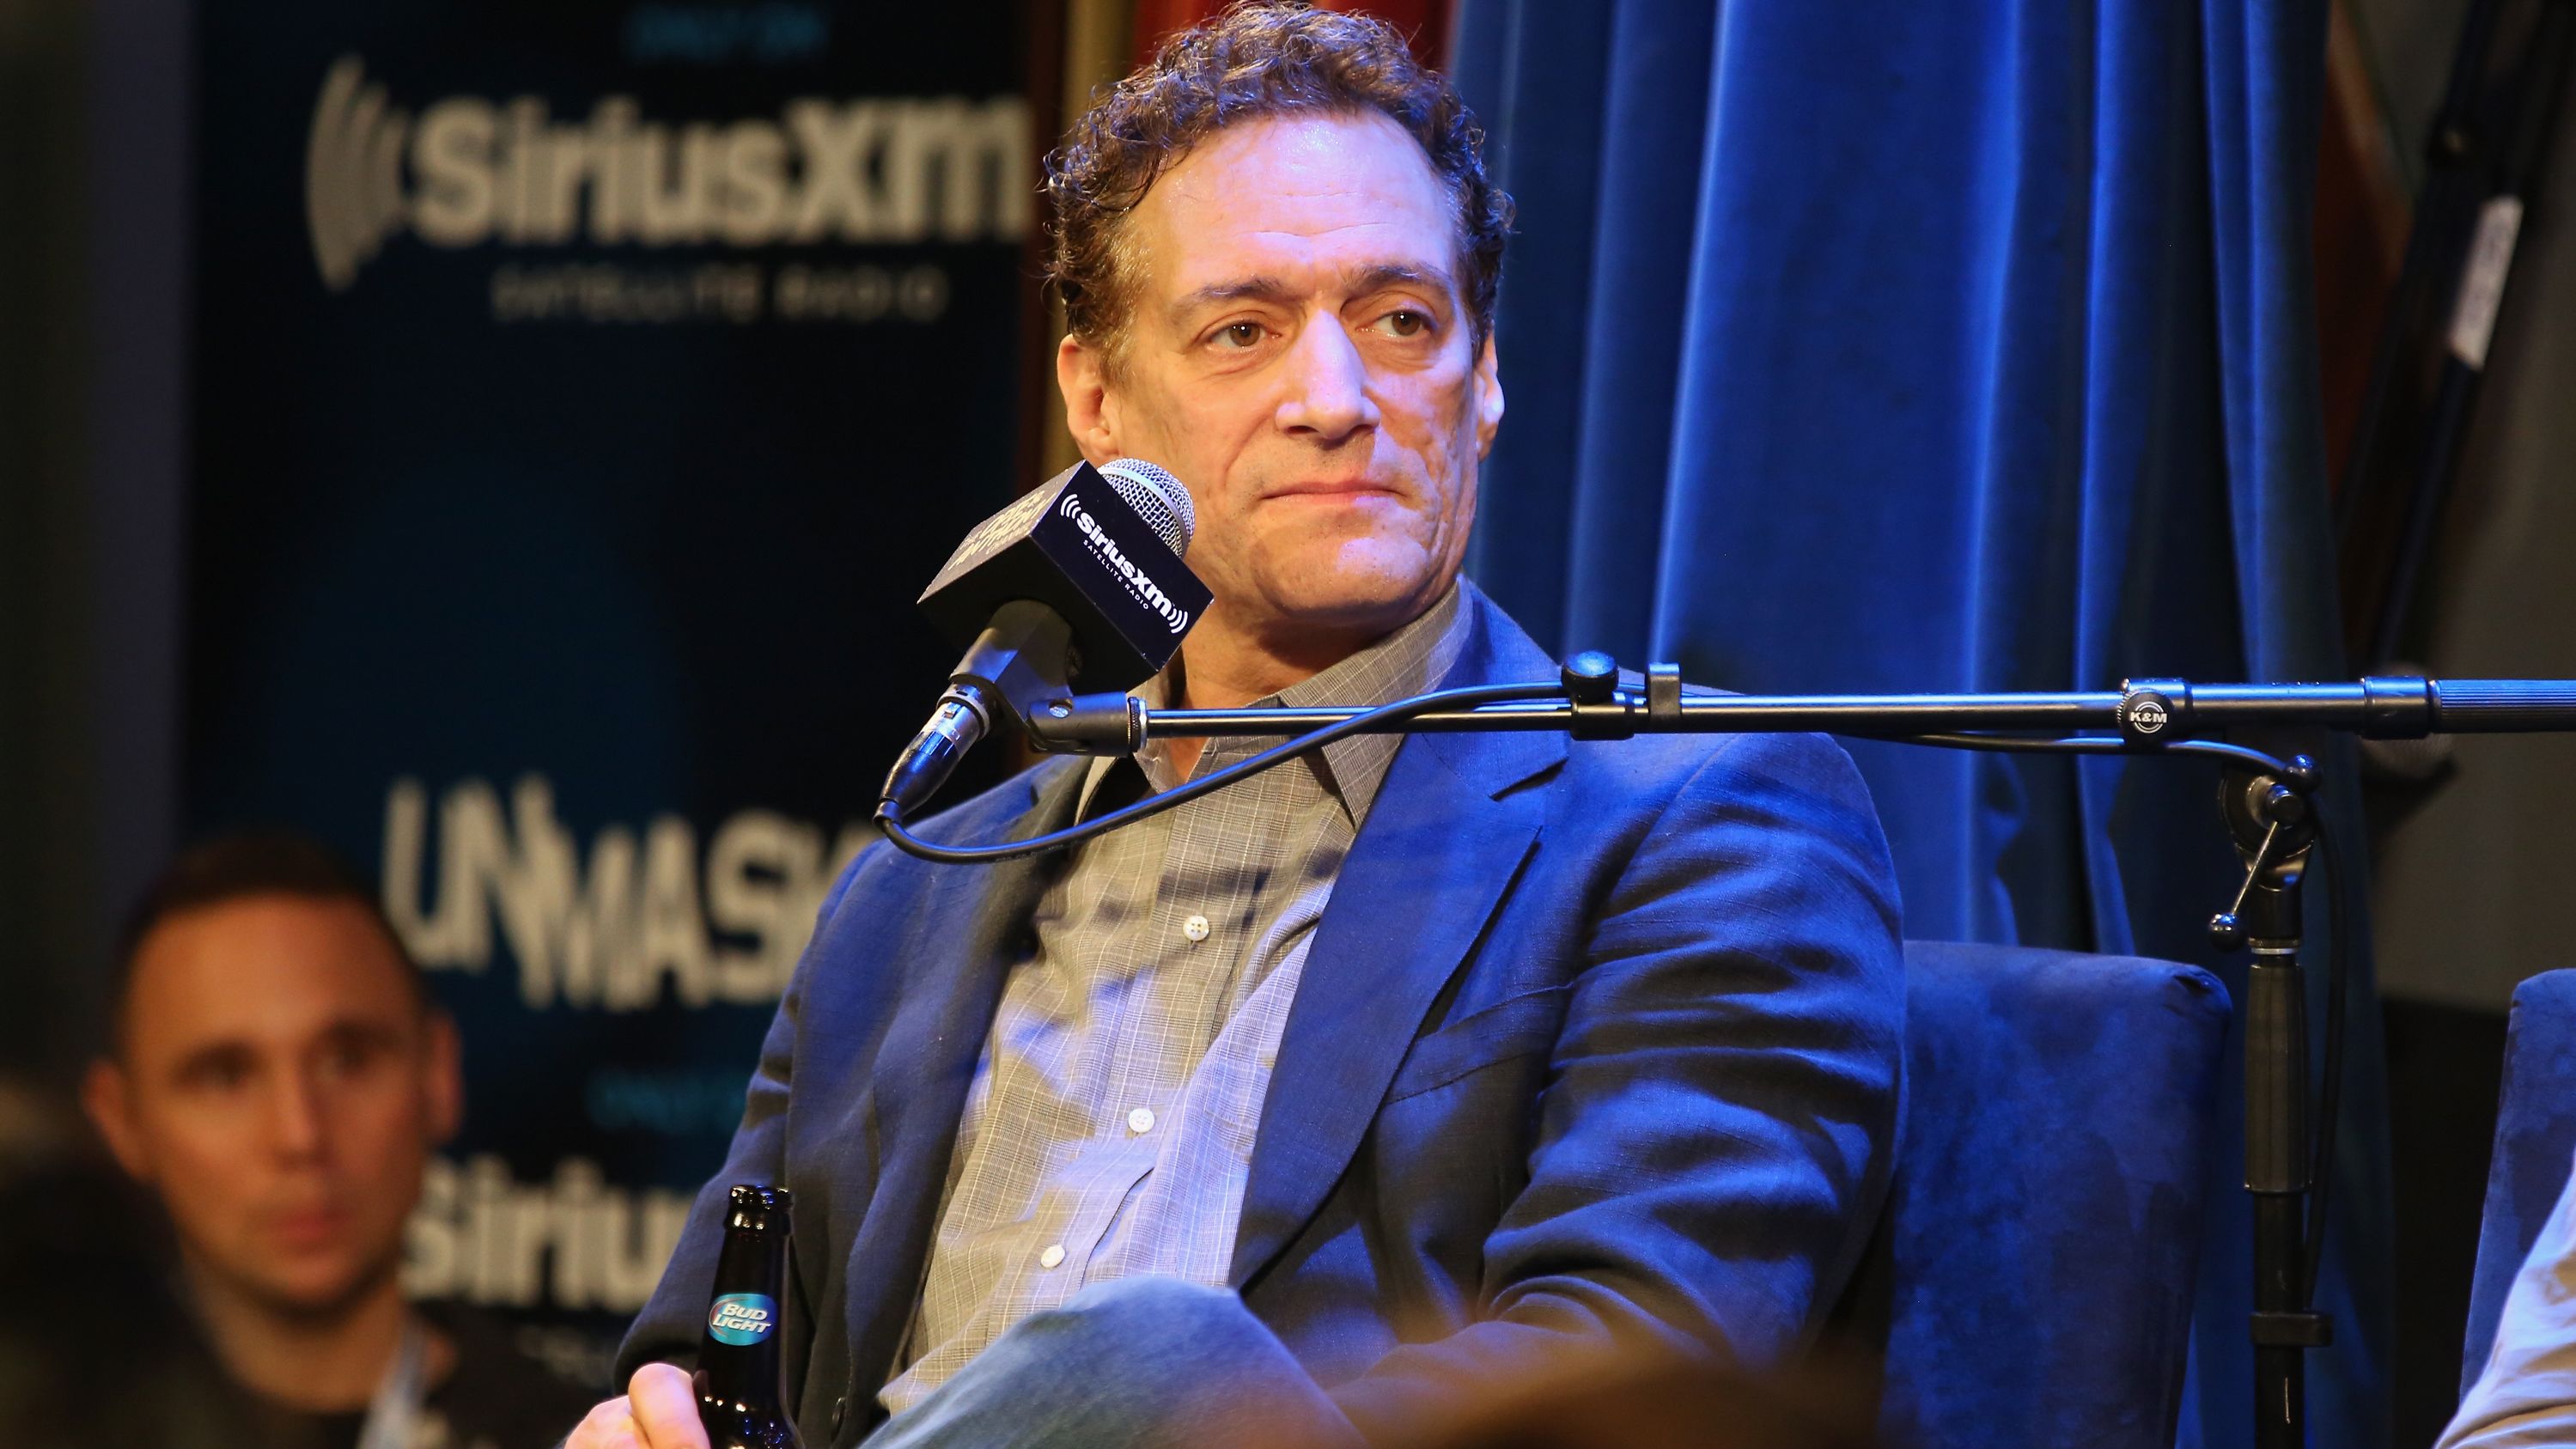 Anthony Cumia, seen here in 2014, was once part of the "Opie and Anthony" shock-jock team.